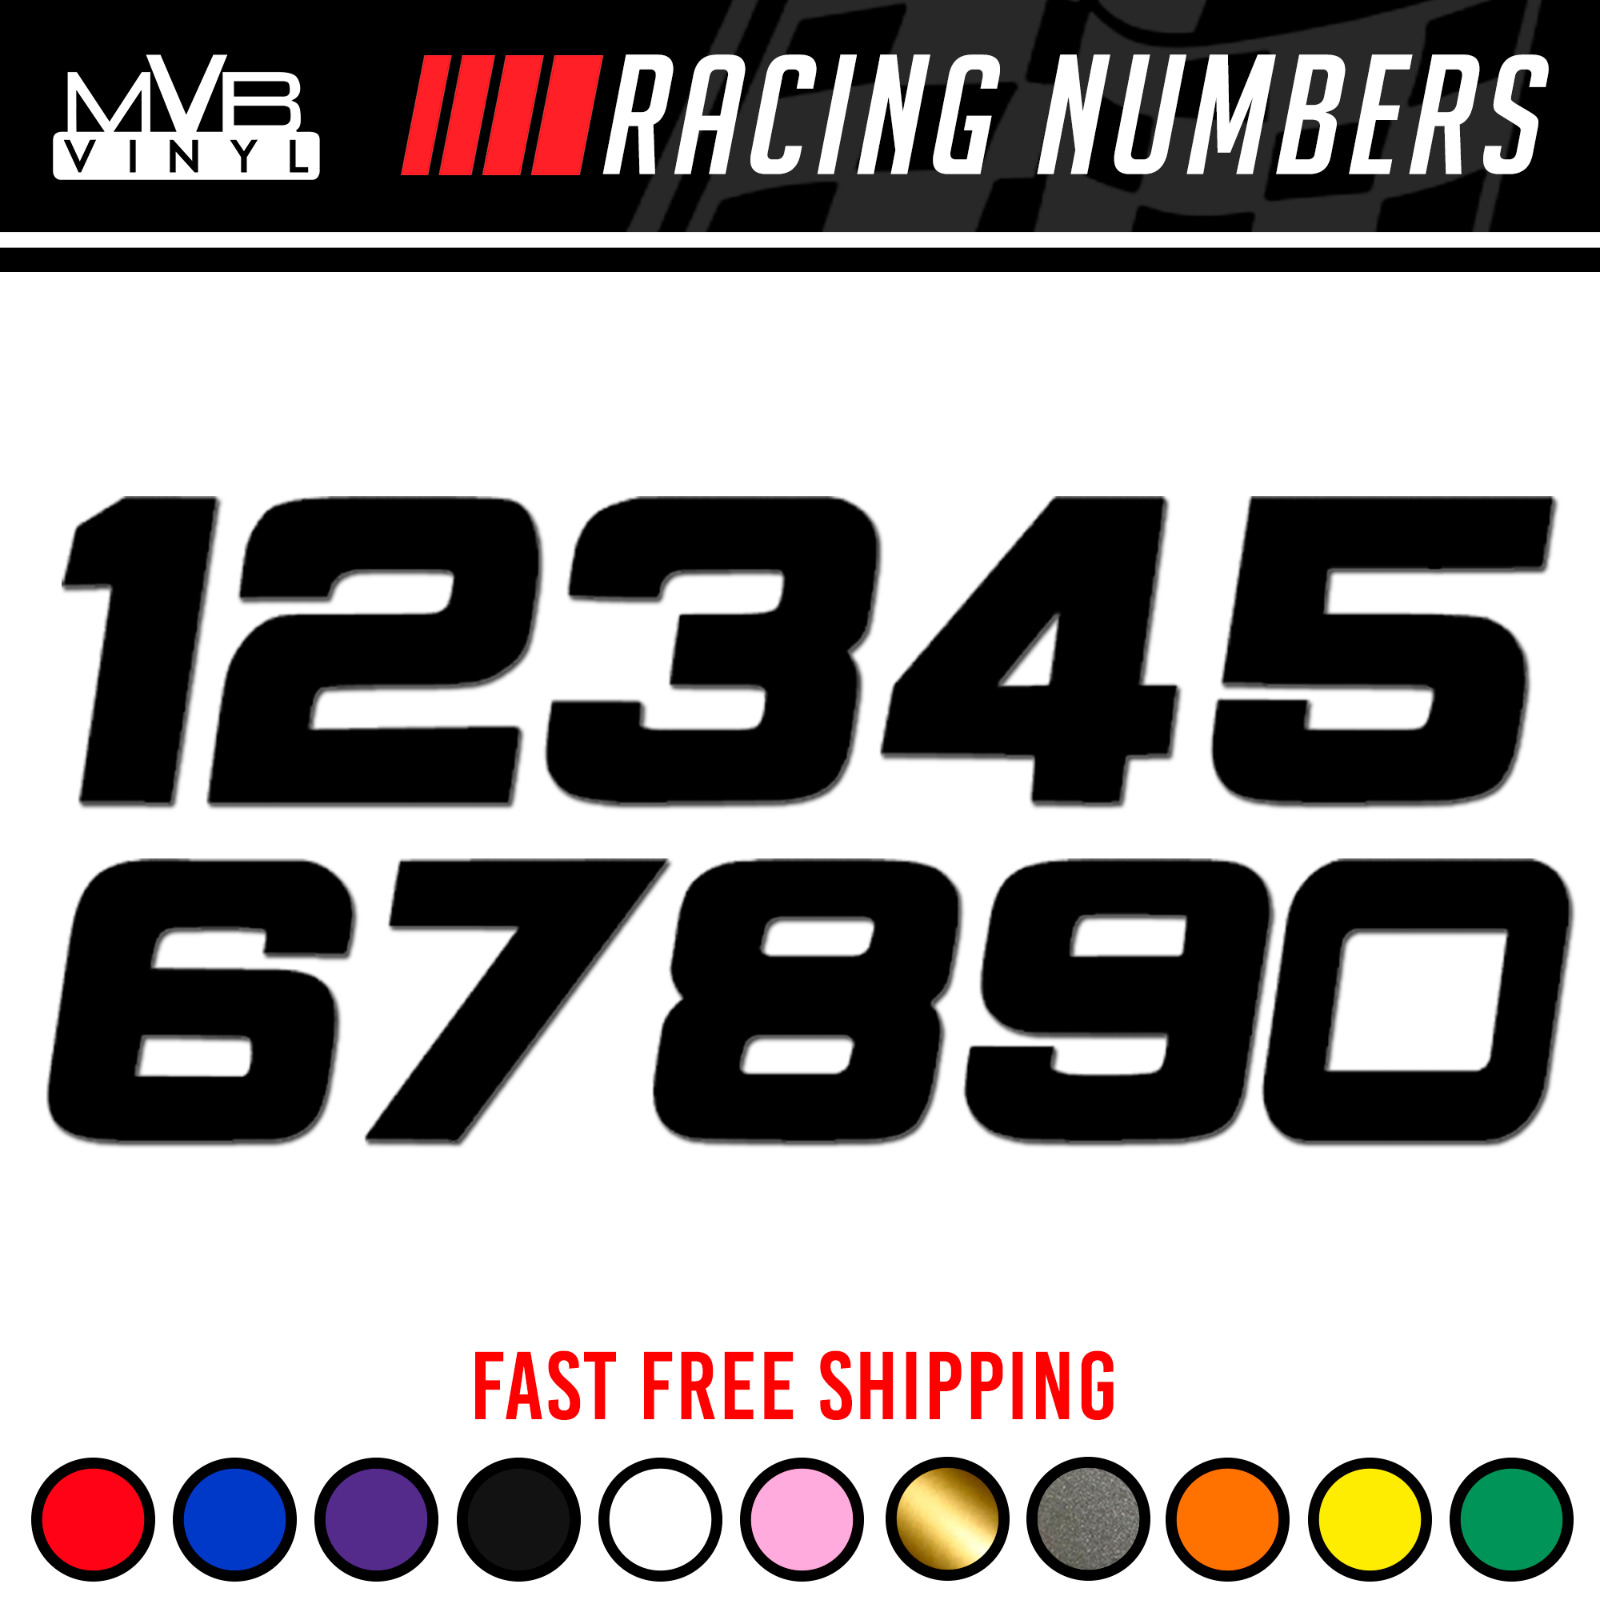 Racing Numbers Vinyl Decal Sticker | Dirt Bike Plate Number BMX Competition 499